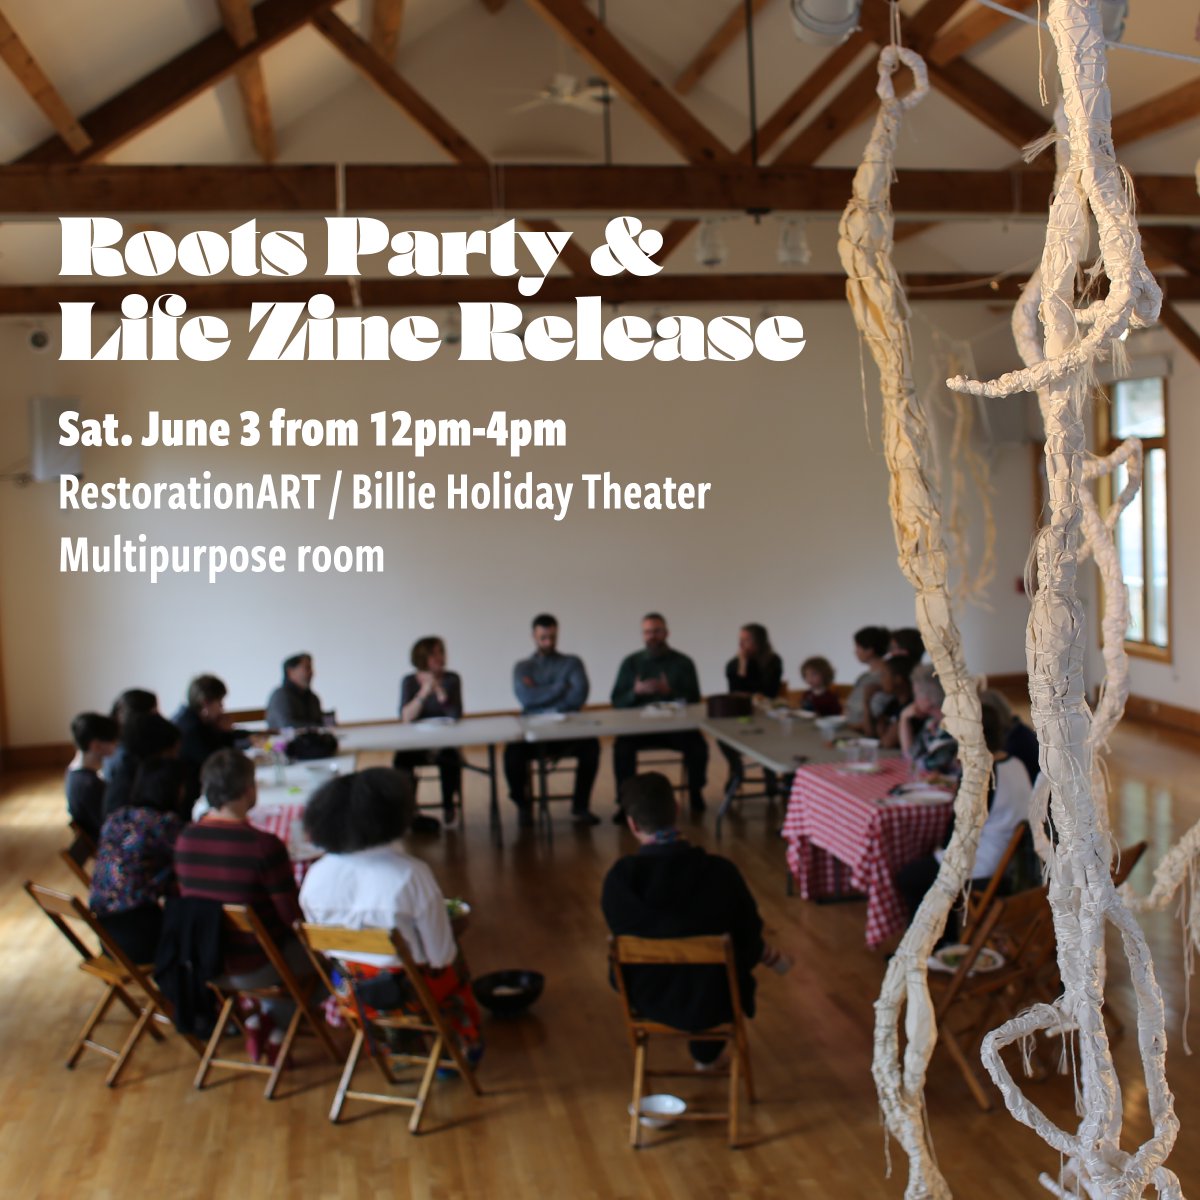 Join us on June 3 and experience artist Edisa Weeks' journey of creating 1,865 roots out of paper and twine for the powerful 3 RITES: Liberty installation. Don't miss the release of 3 RITES: Life Zine + conversation with James Scruggs! Tix are FREE! #TheBillieIsBack